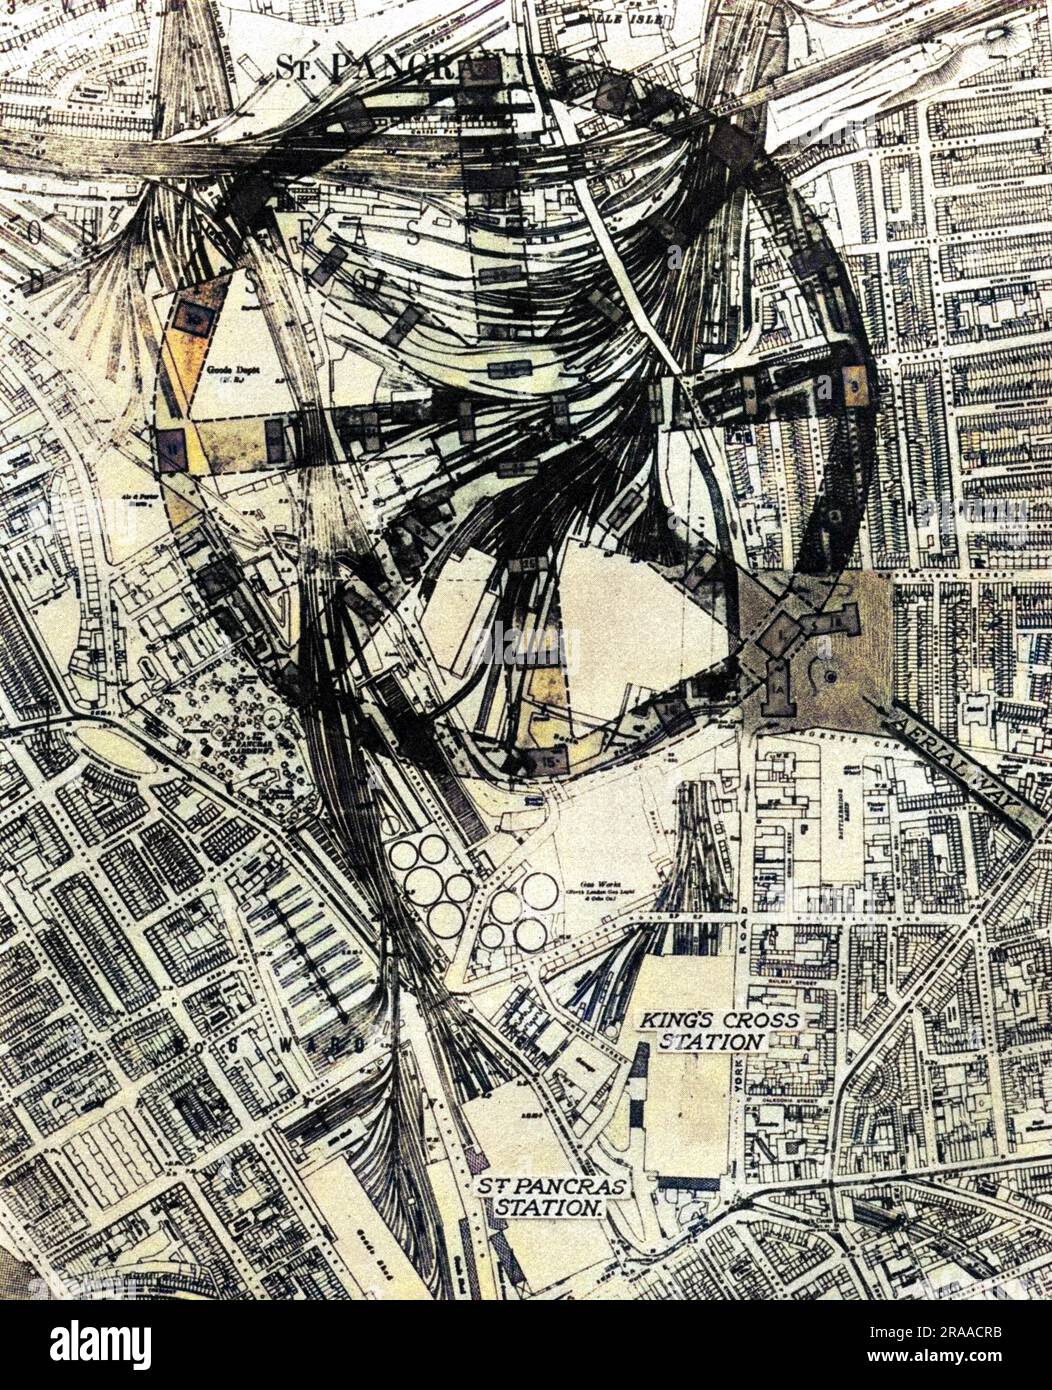 A suggested central London air terminus at Kings Cross, combined with a railway, road goods terminus and a large station for motor coaches and omnibuses. Aeroplanes can be seen landing on the runways of a huge wheel like structure in this impressionistic sketch.     Date: 1931 Stock Photo